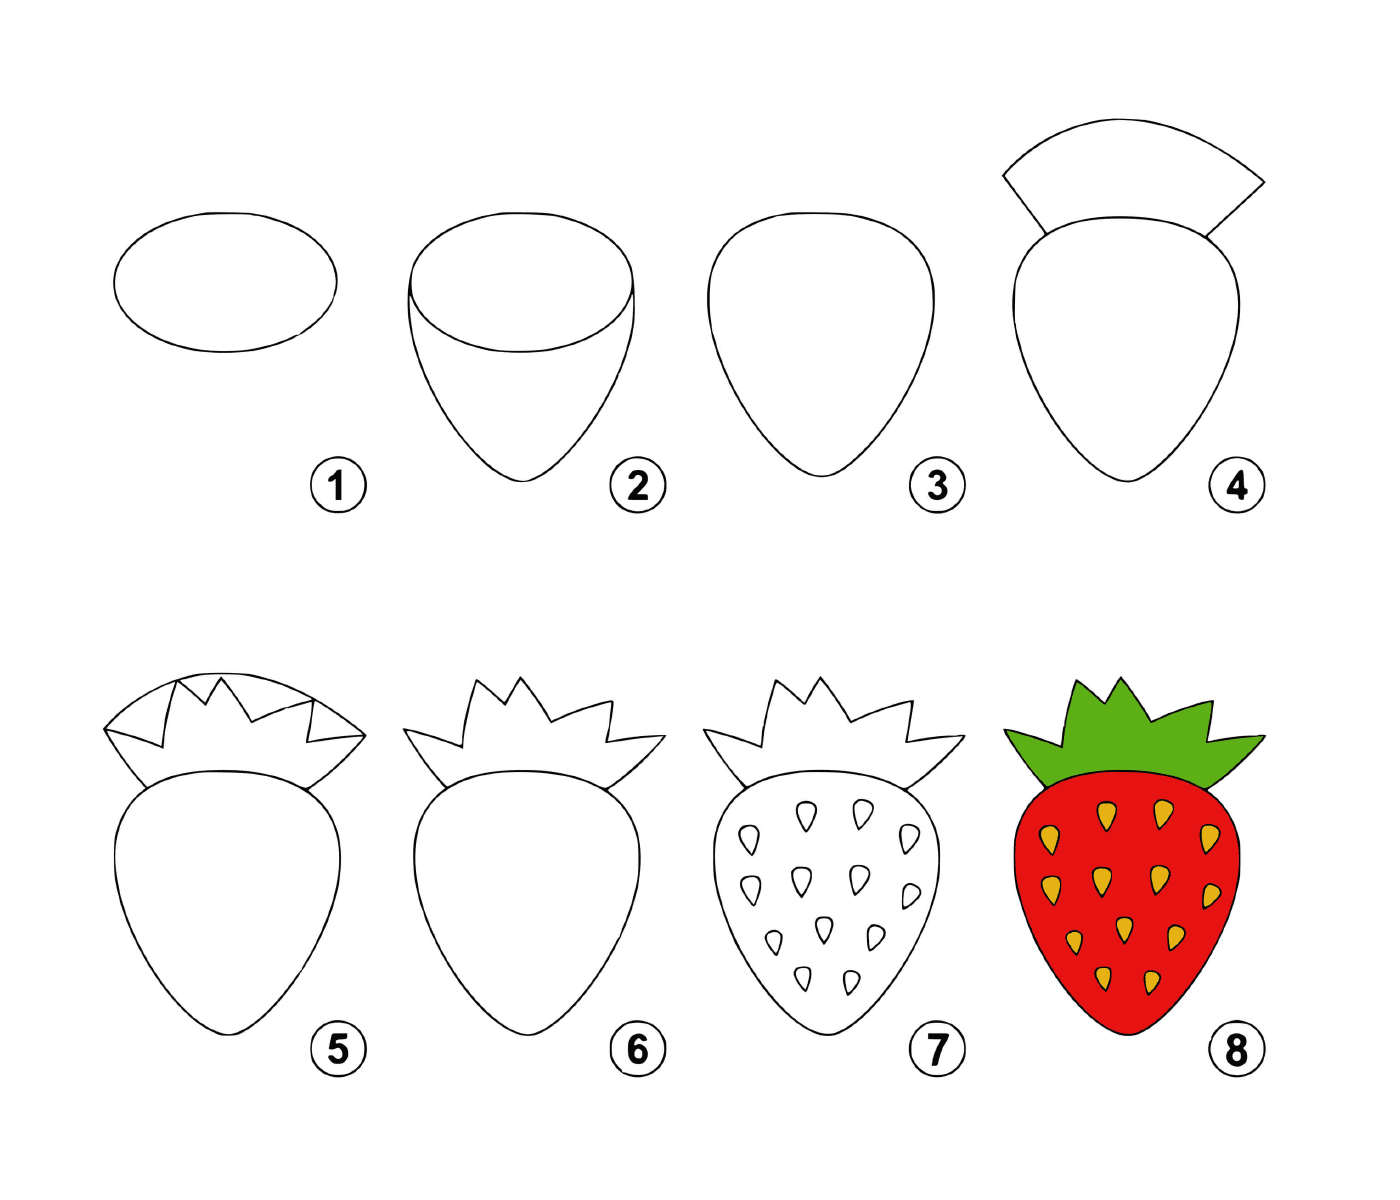  How to draw a strawberry step by step 